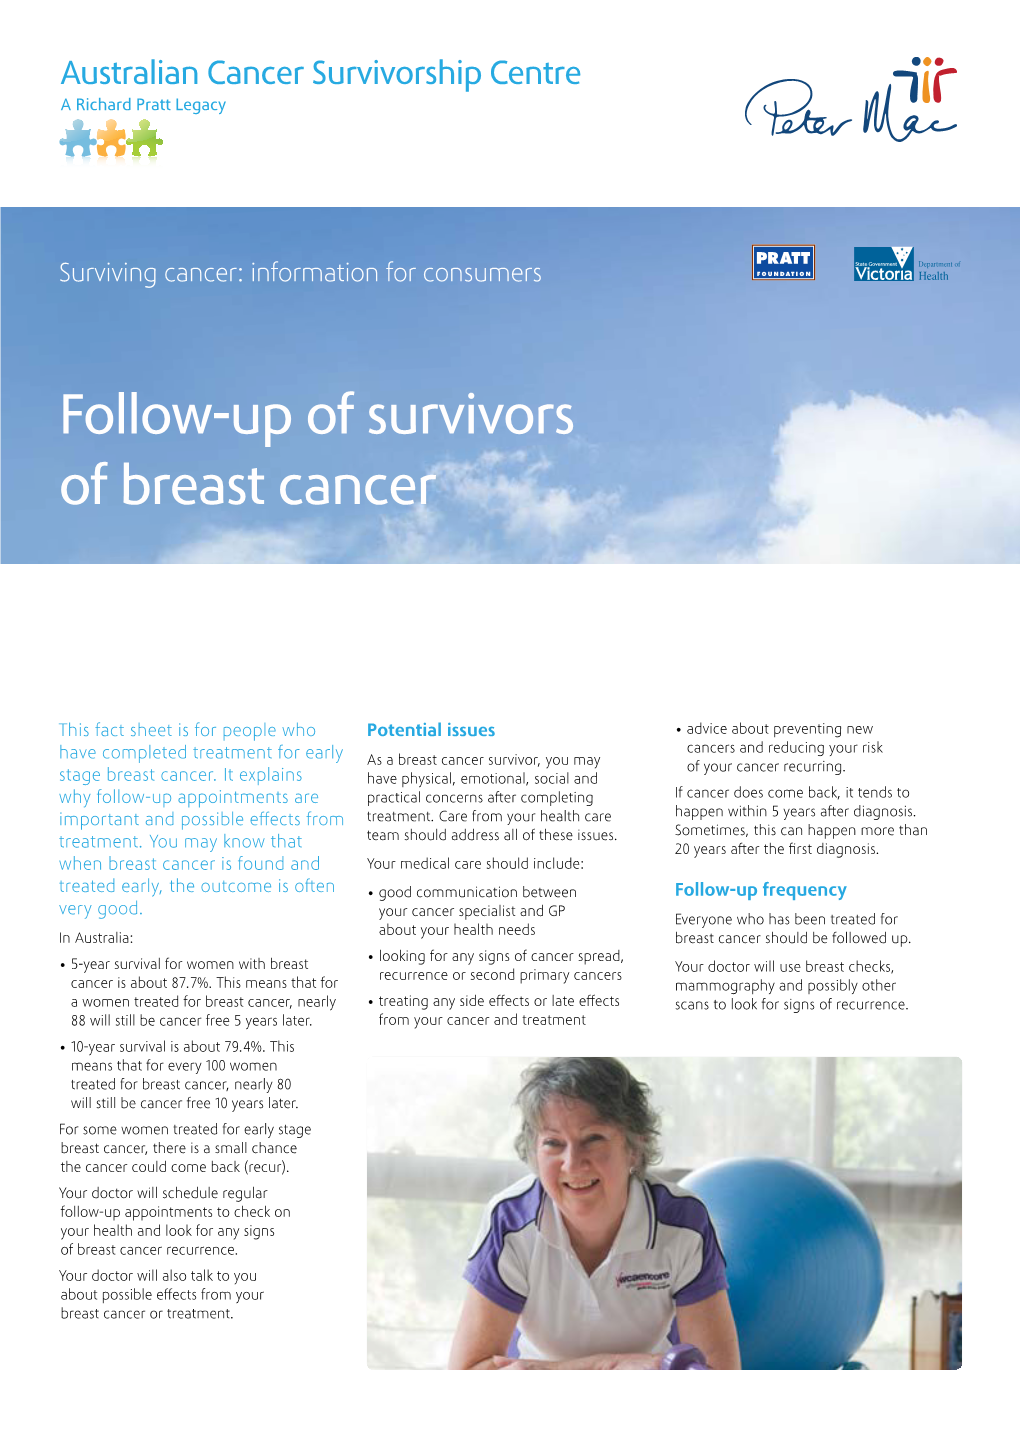 Follow-Up of Survivors of Breast Cancer